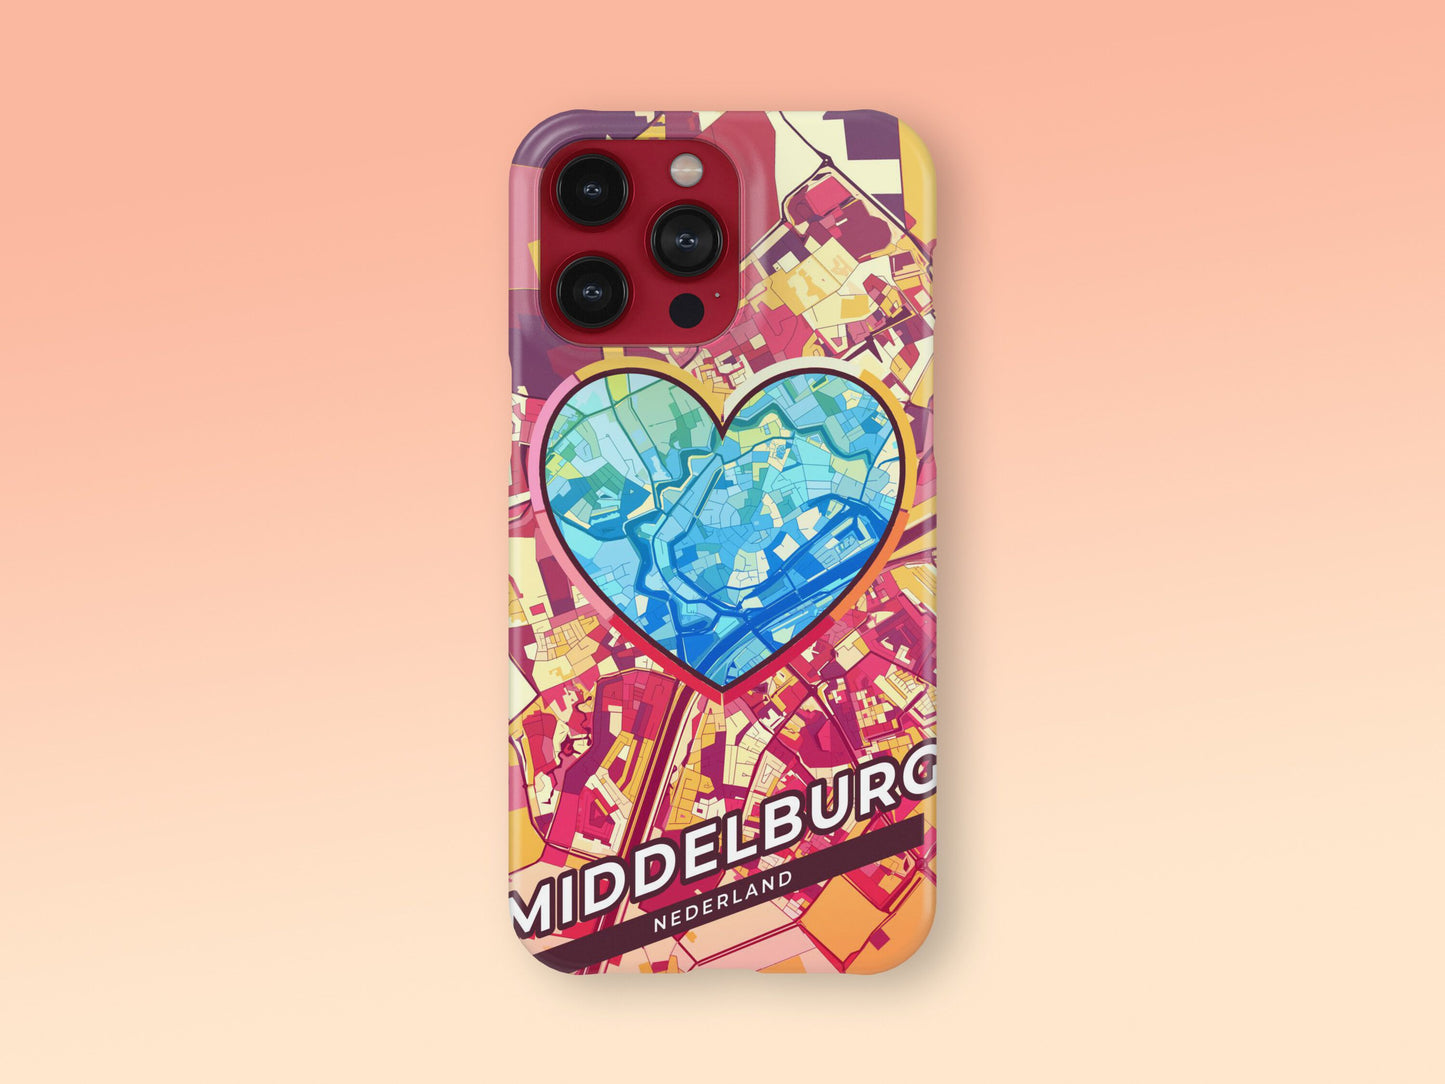 Middelburg Netherlands slim phone case with colorful icon 2